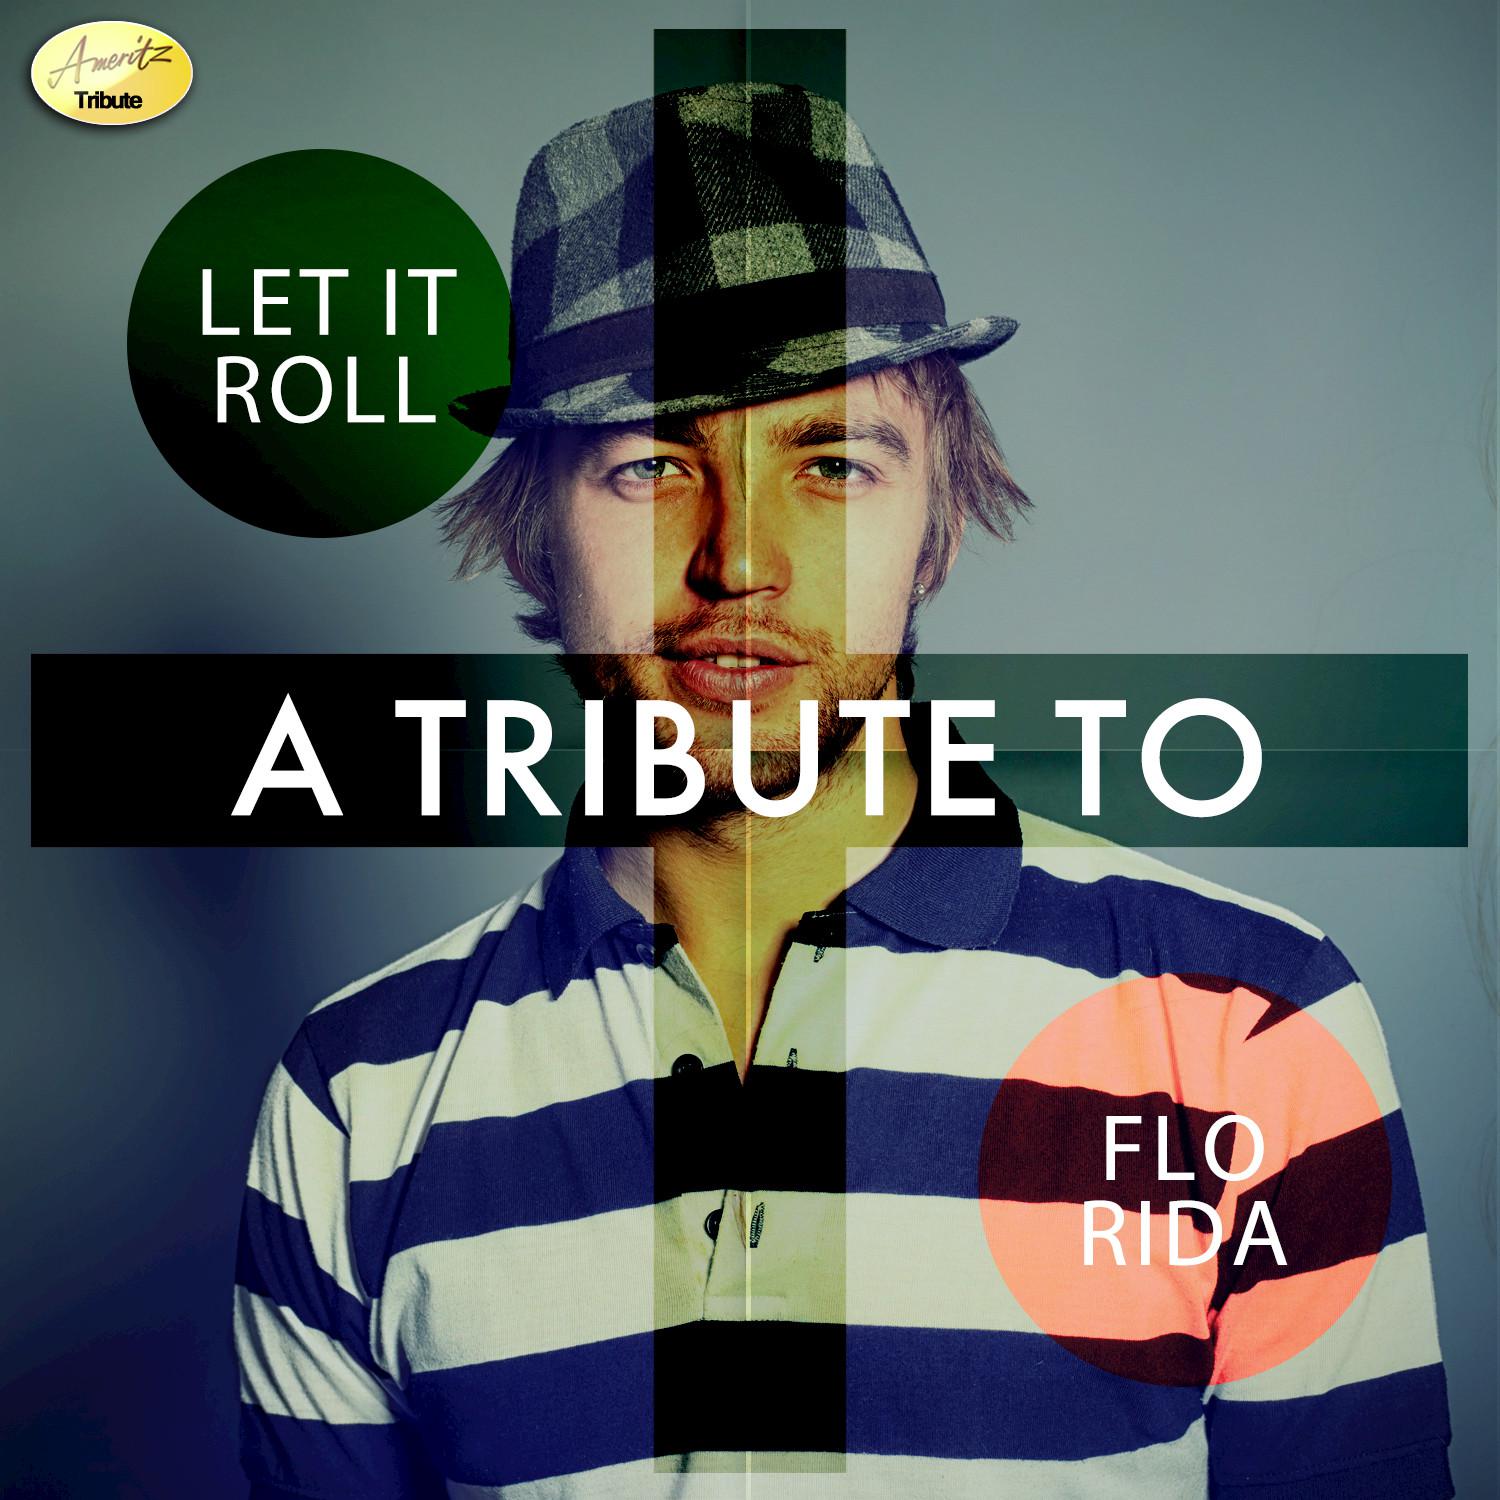 Let It Roll - A Tribute to Flo Rida